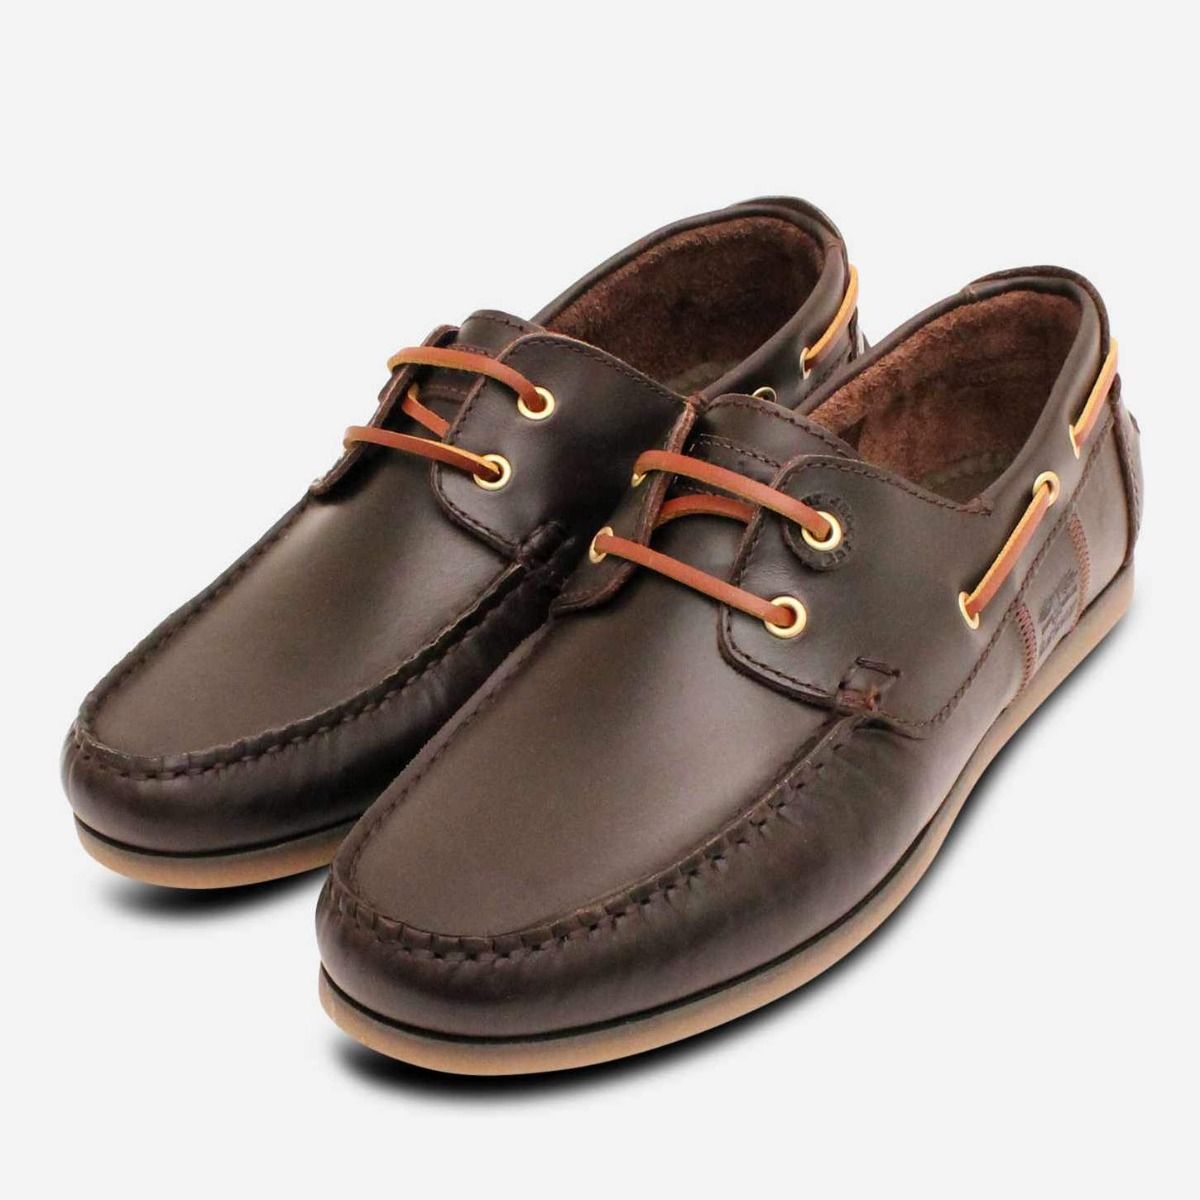 Barbour Dark Brown Leather Mens Capstan Boat Shoes